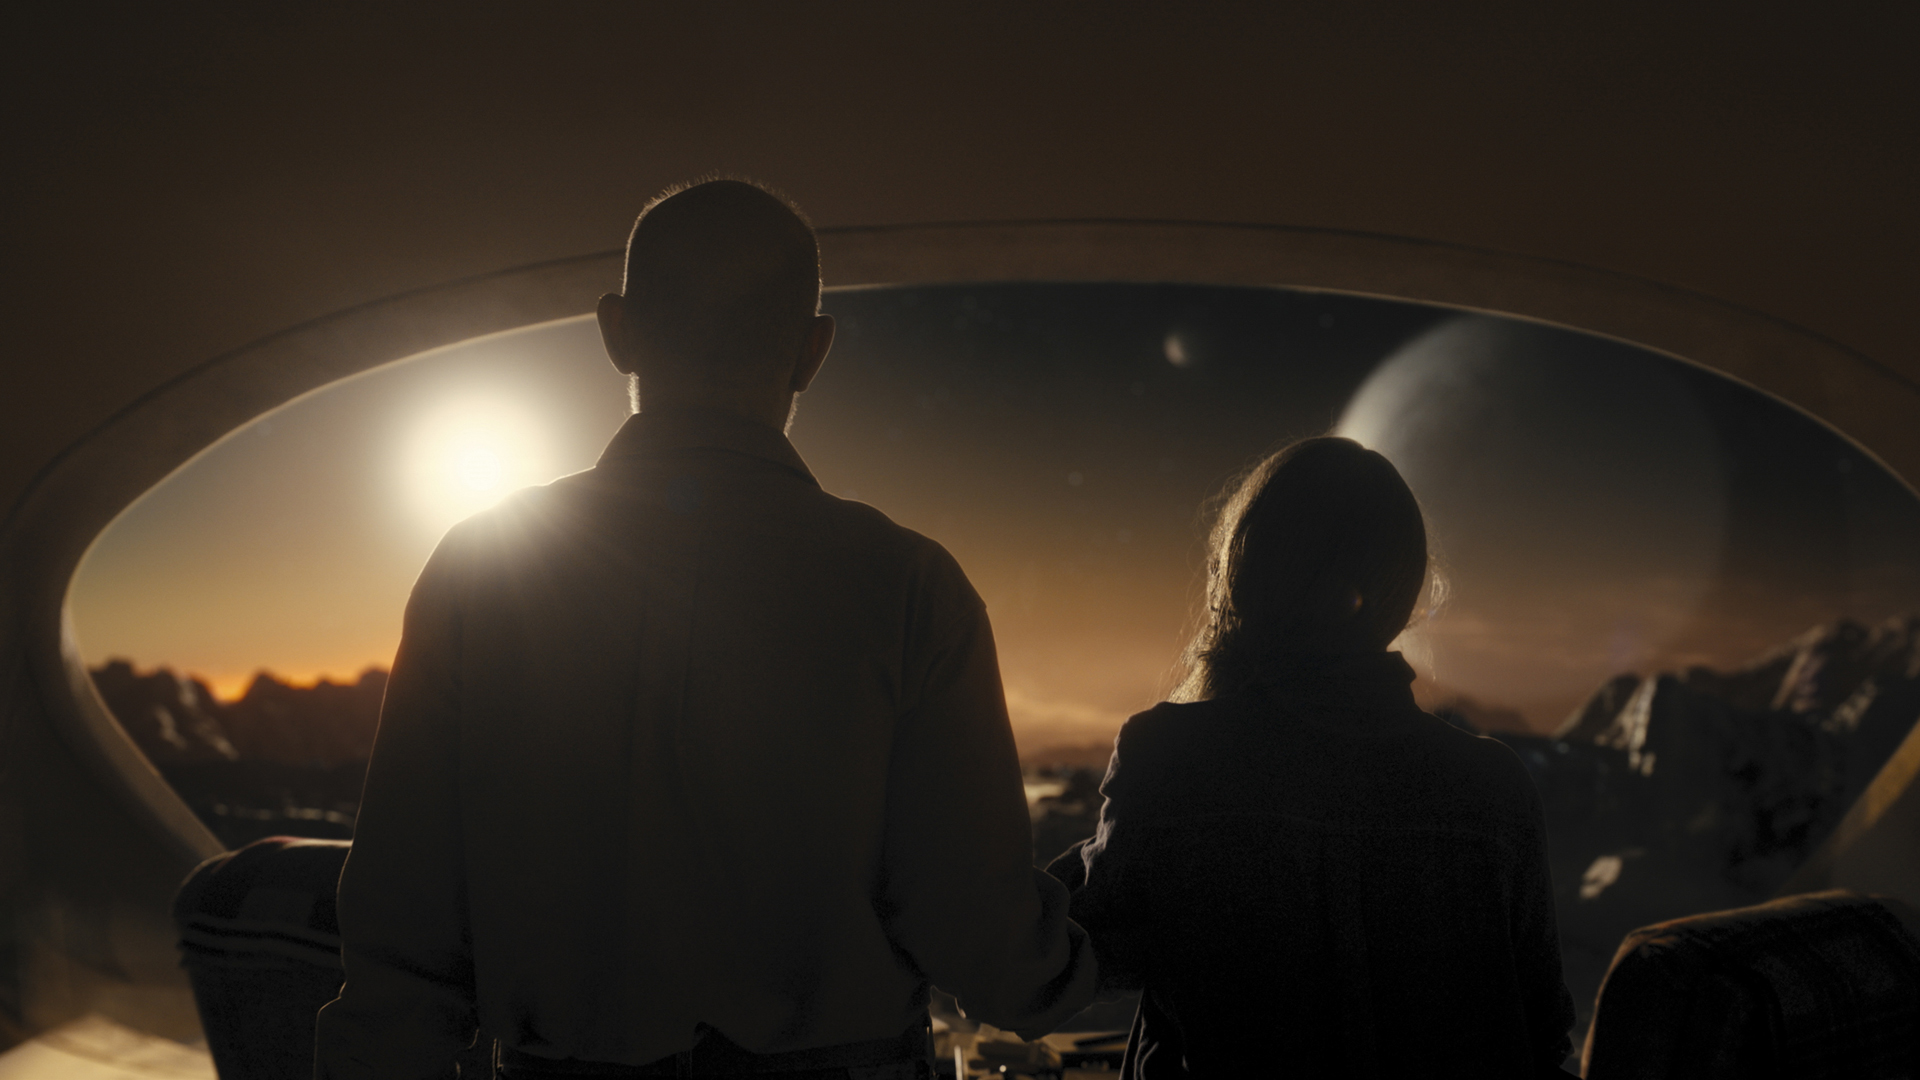 Sissy Spacek's Irene and J.K Simmons' Franklin look out onto a deserted planet in Prime Video's Night Sky